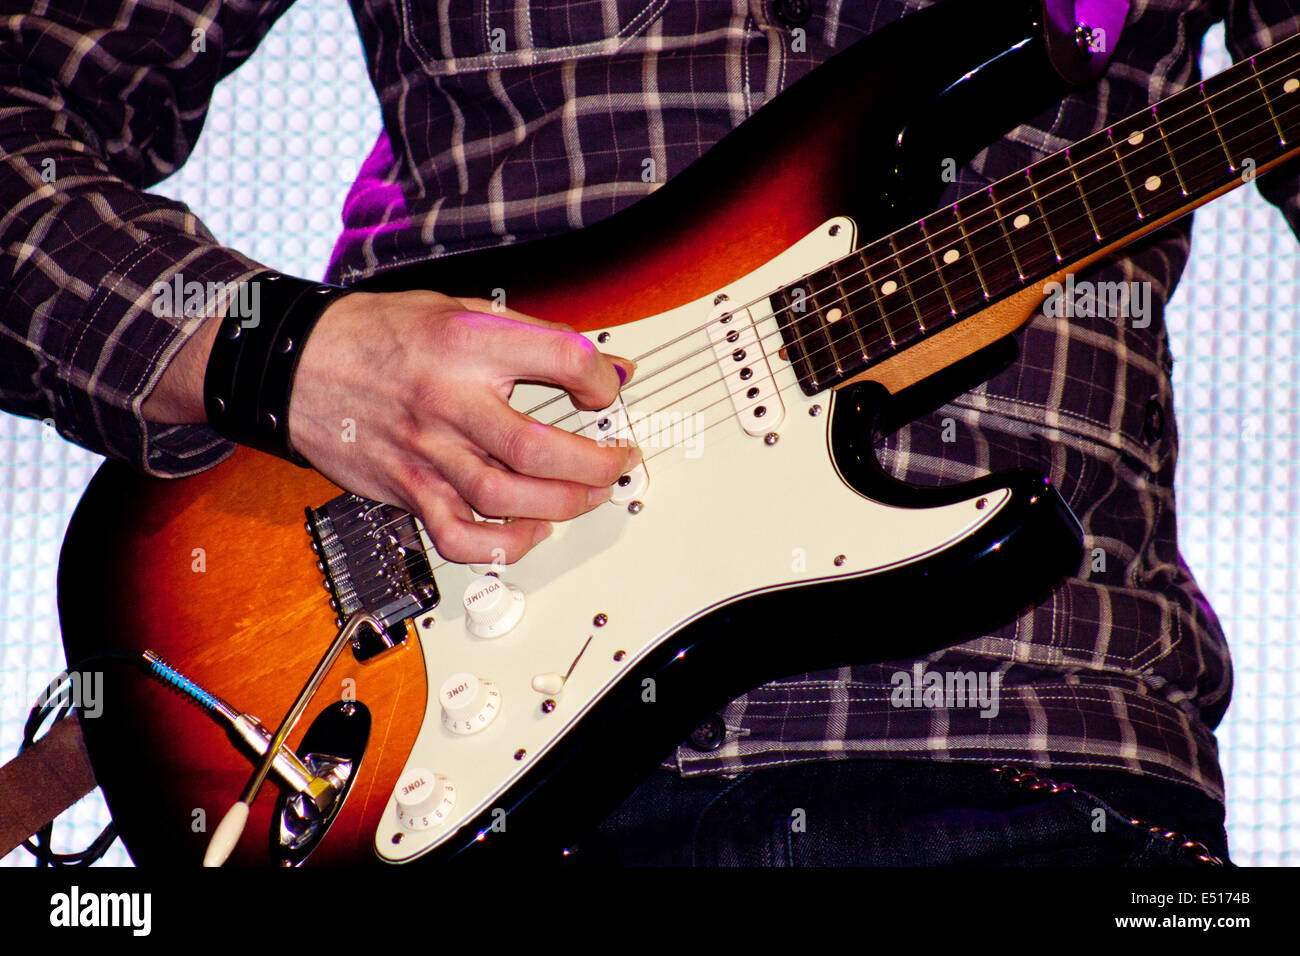 Close up of an electric guitar being played Stock Photo